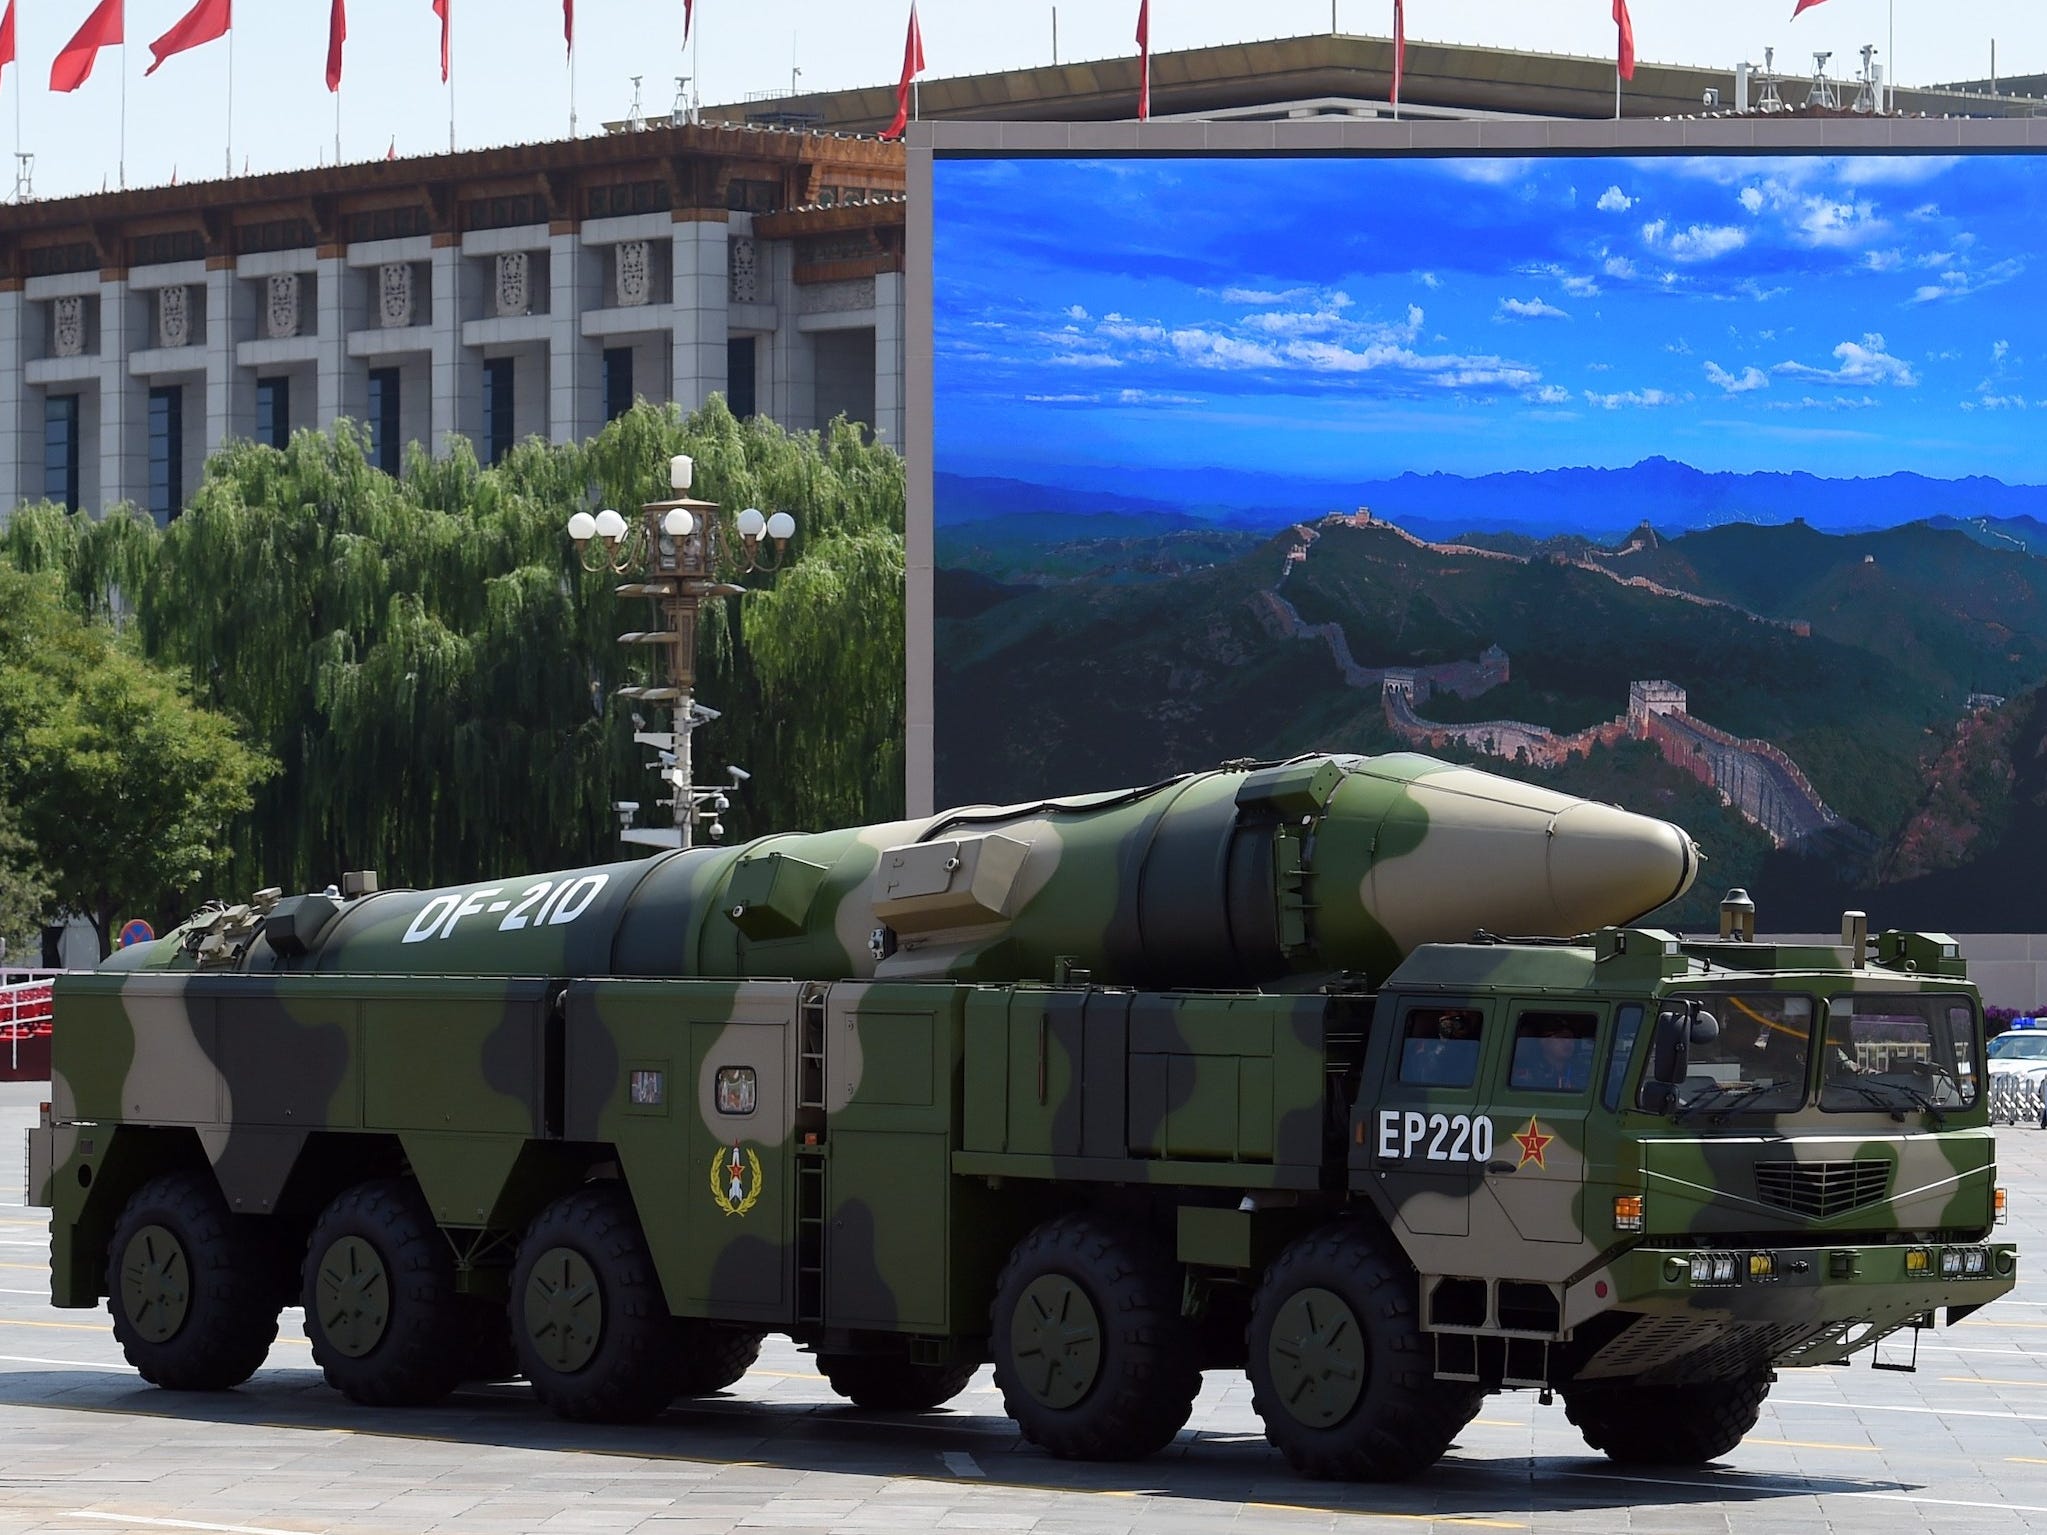 China military missile DF-21